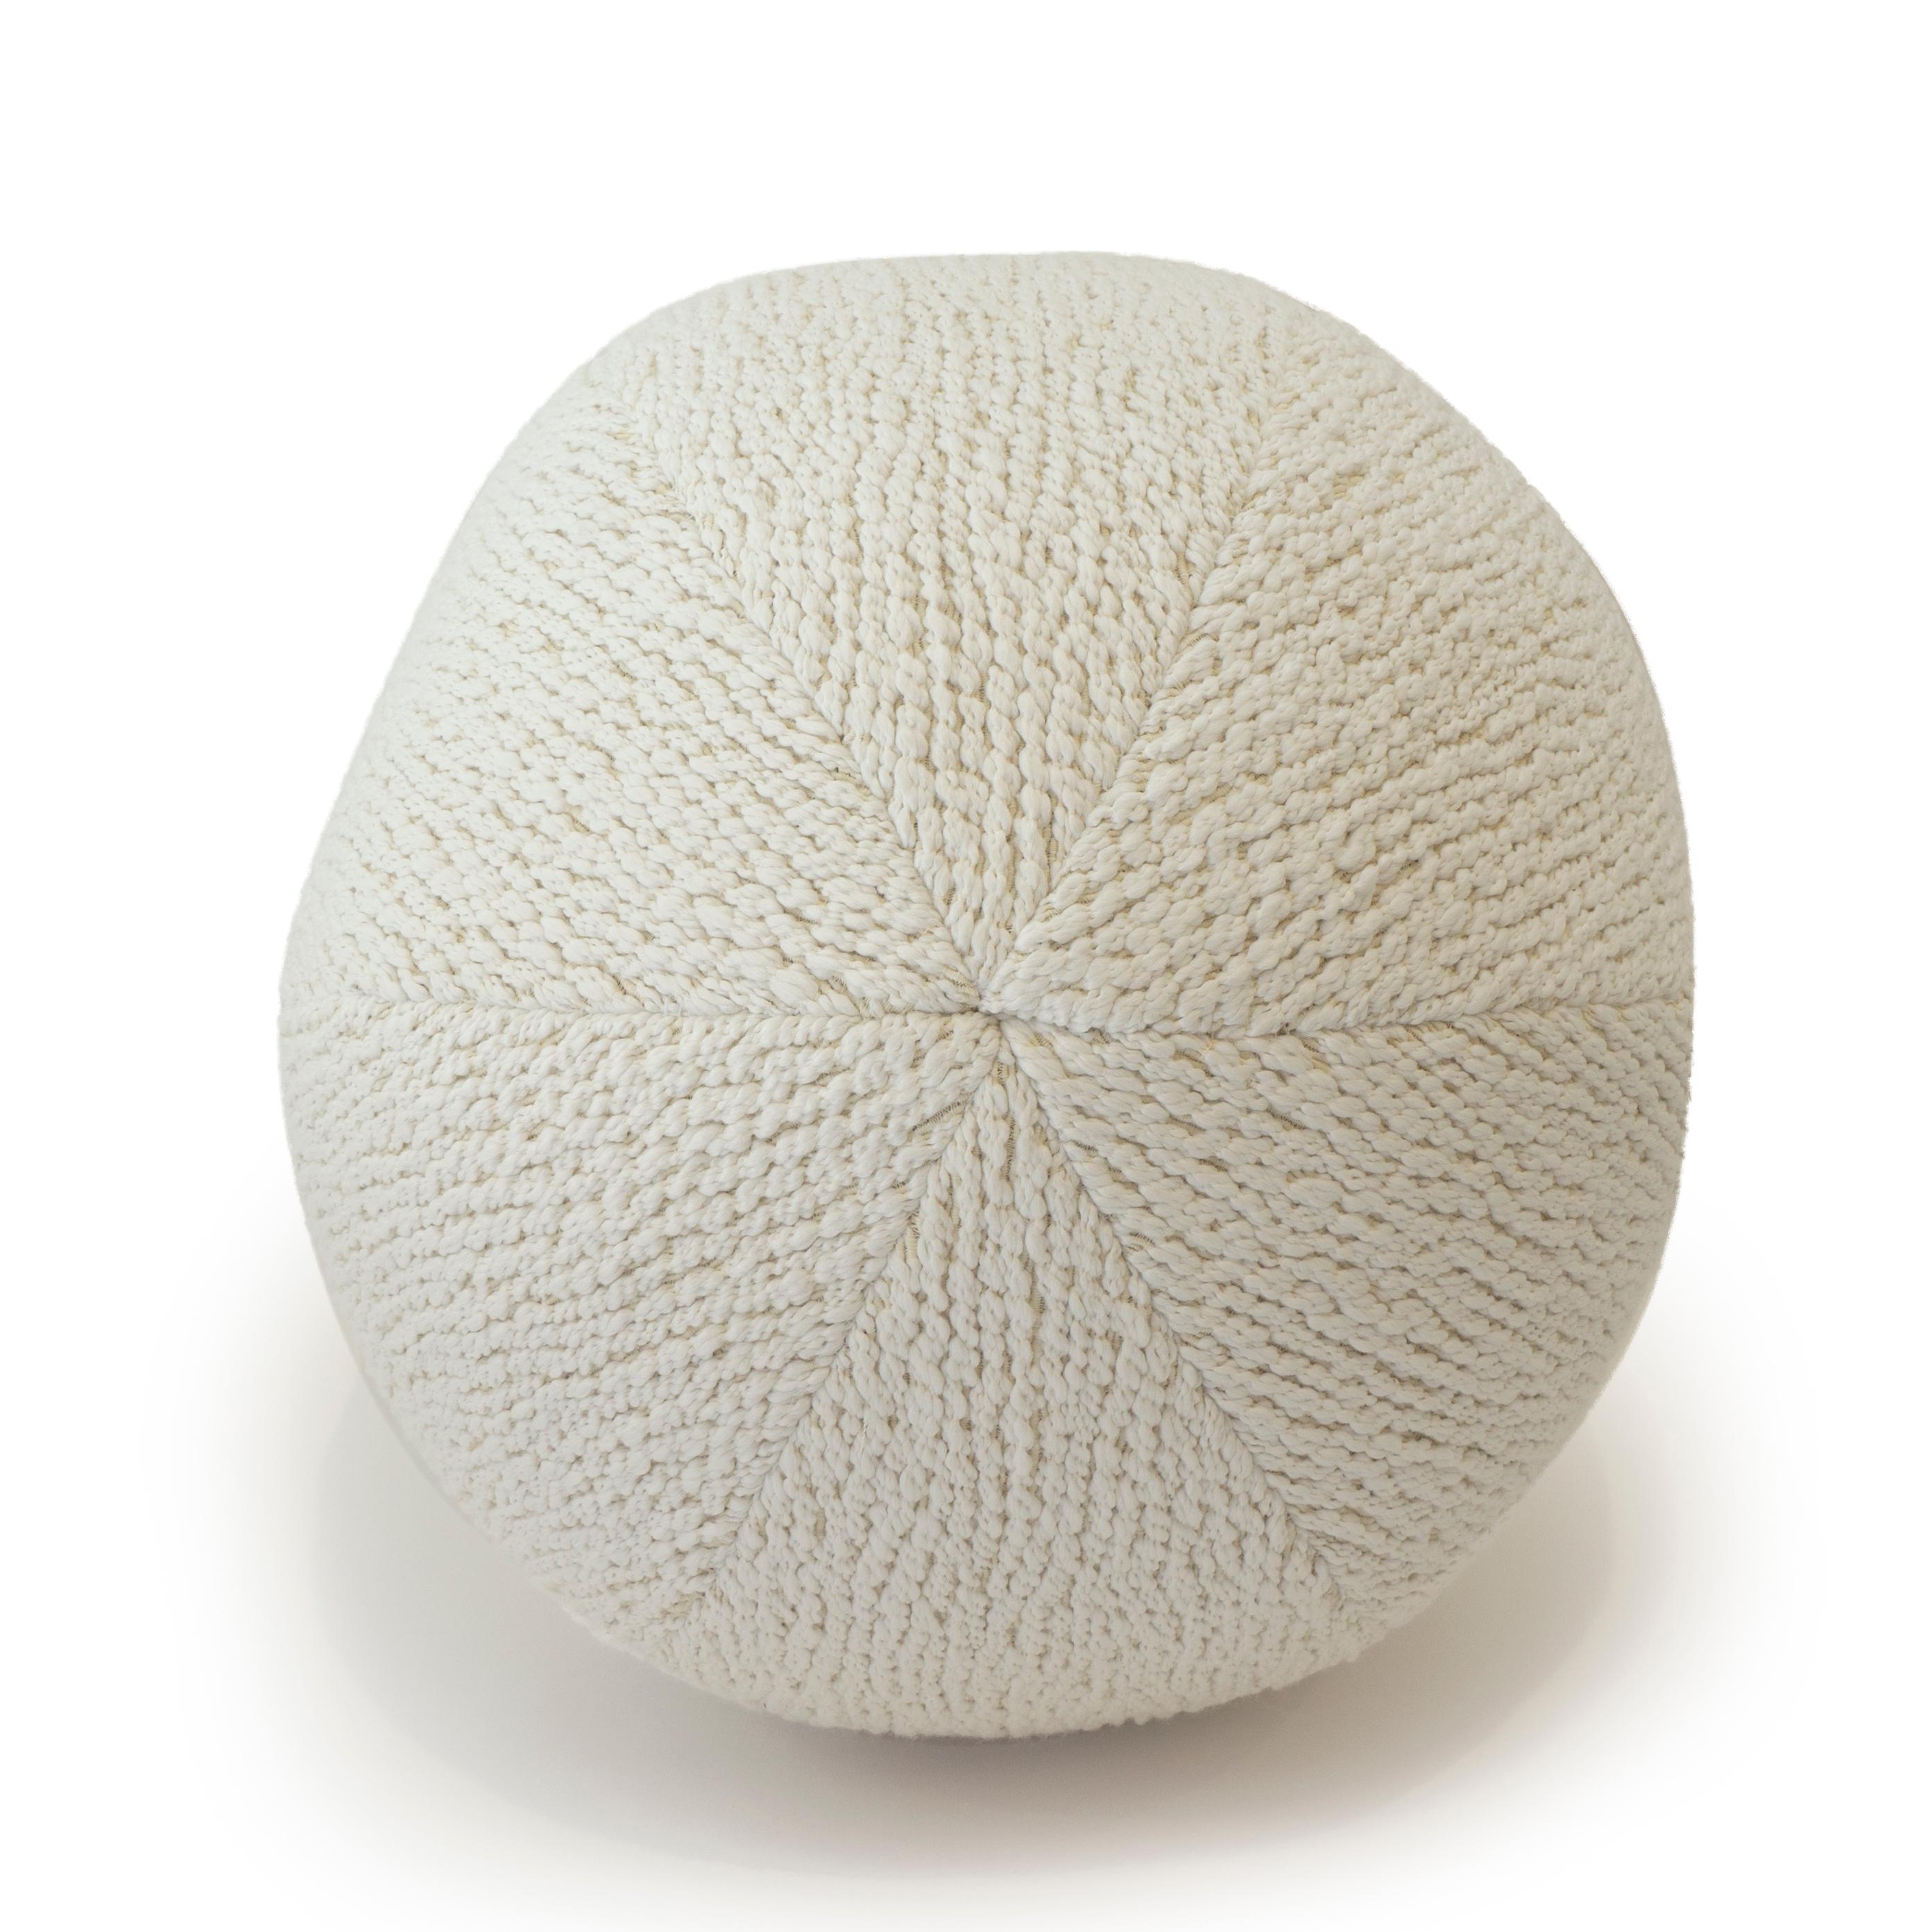 The braided ball pillow is made with a knotted wool and polyester blend fabric in a neutral cream color. All pillows are handmade at our studio in Norwalk, CT. 

Measurements:
Overall: 12” x 12”.
Disclaimer: Due to their handcrafted nature, the